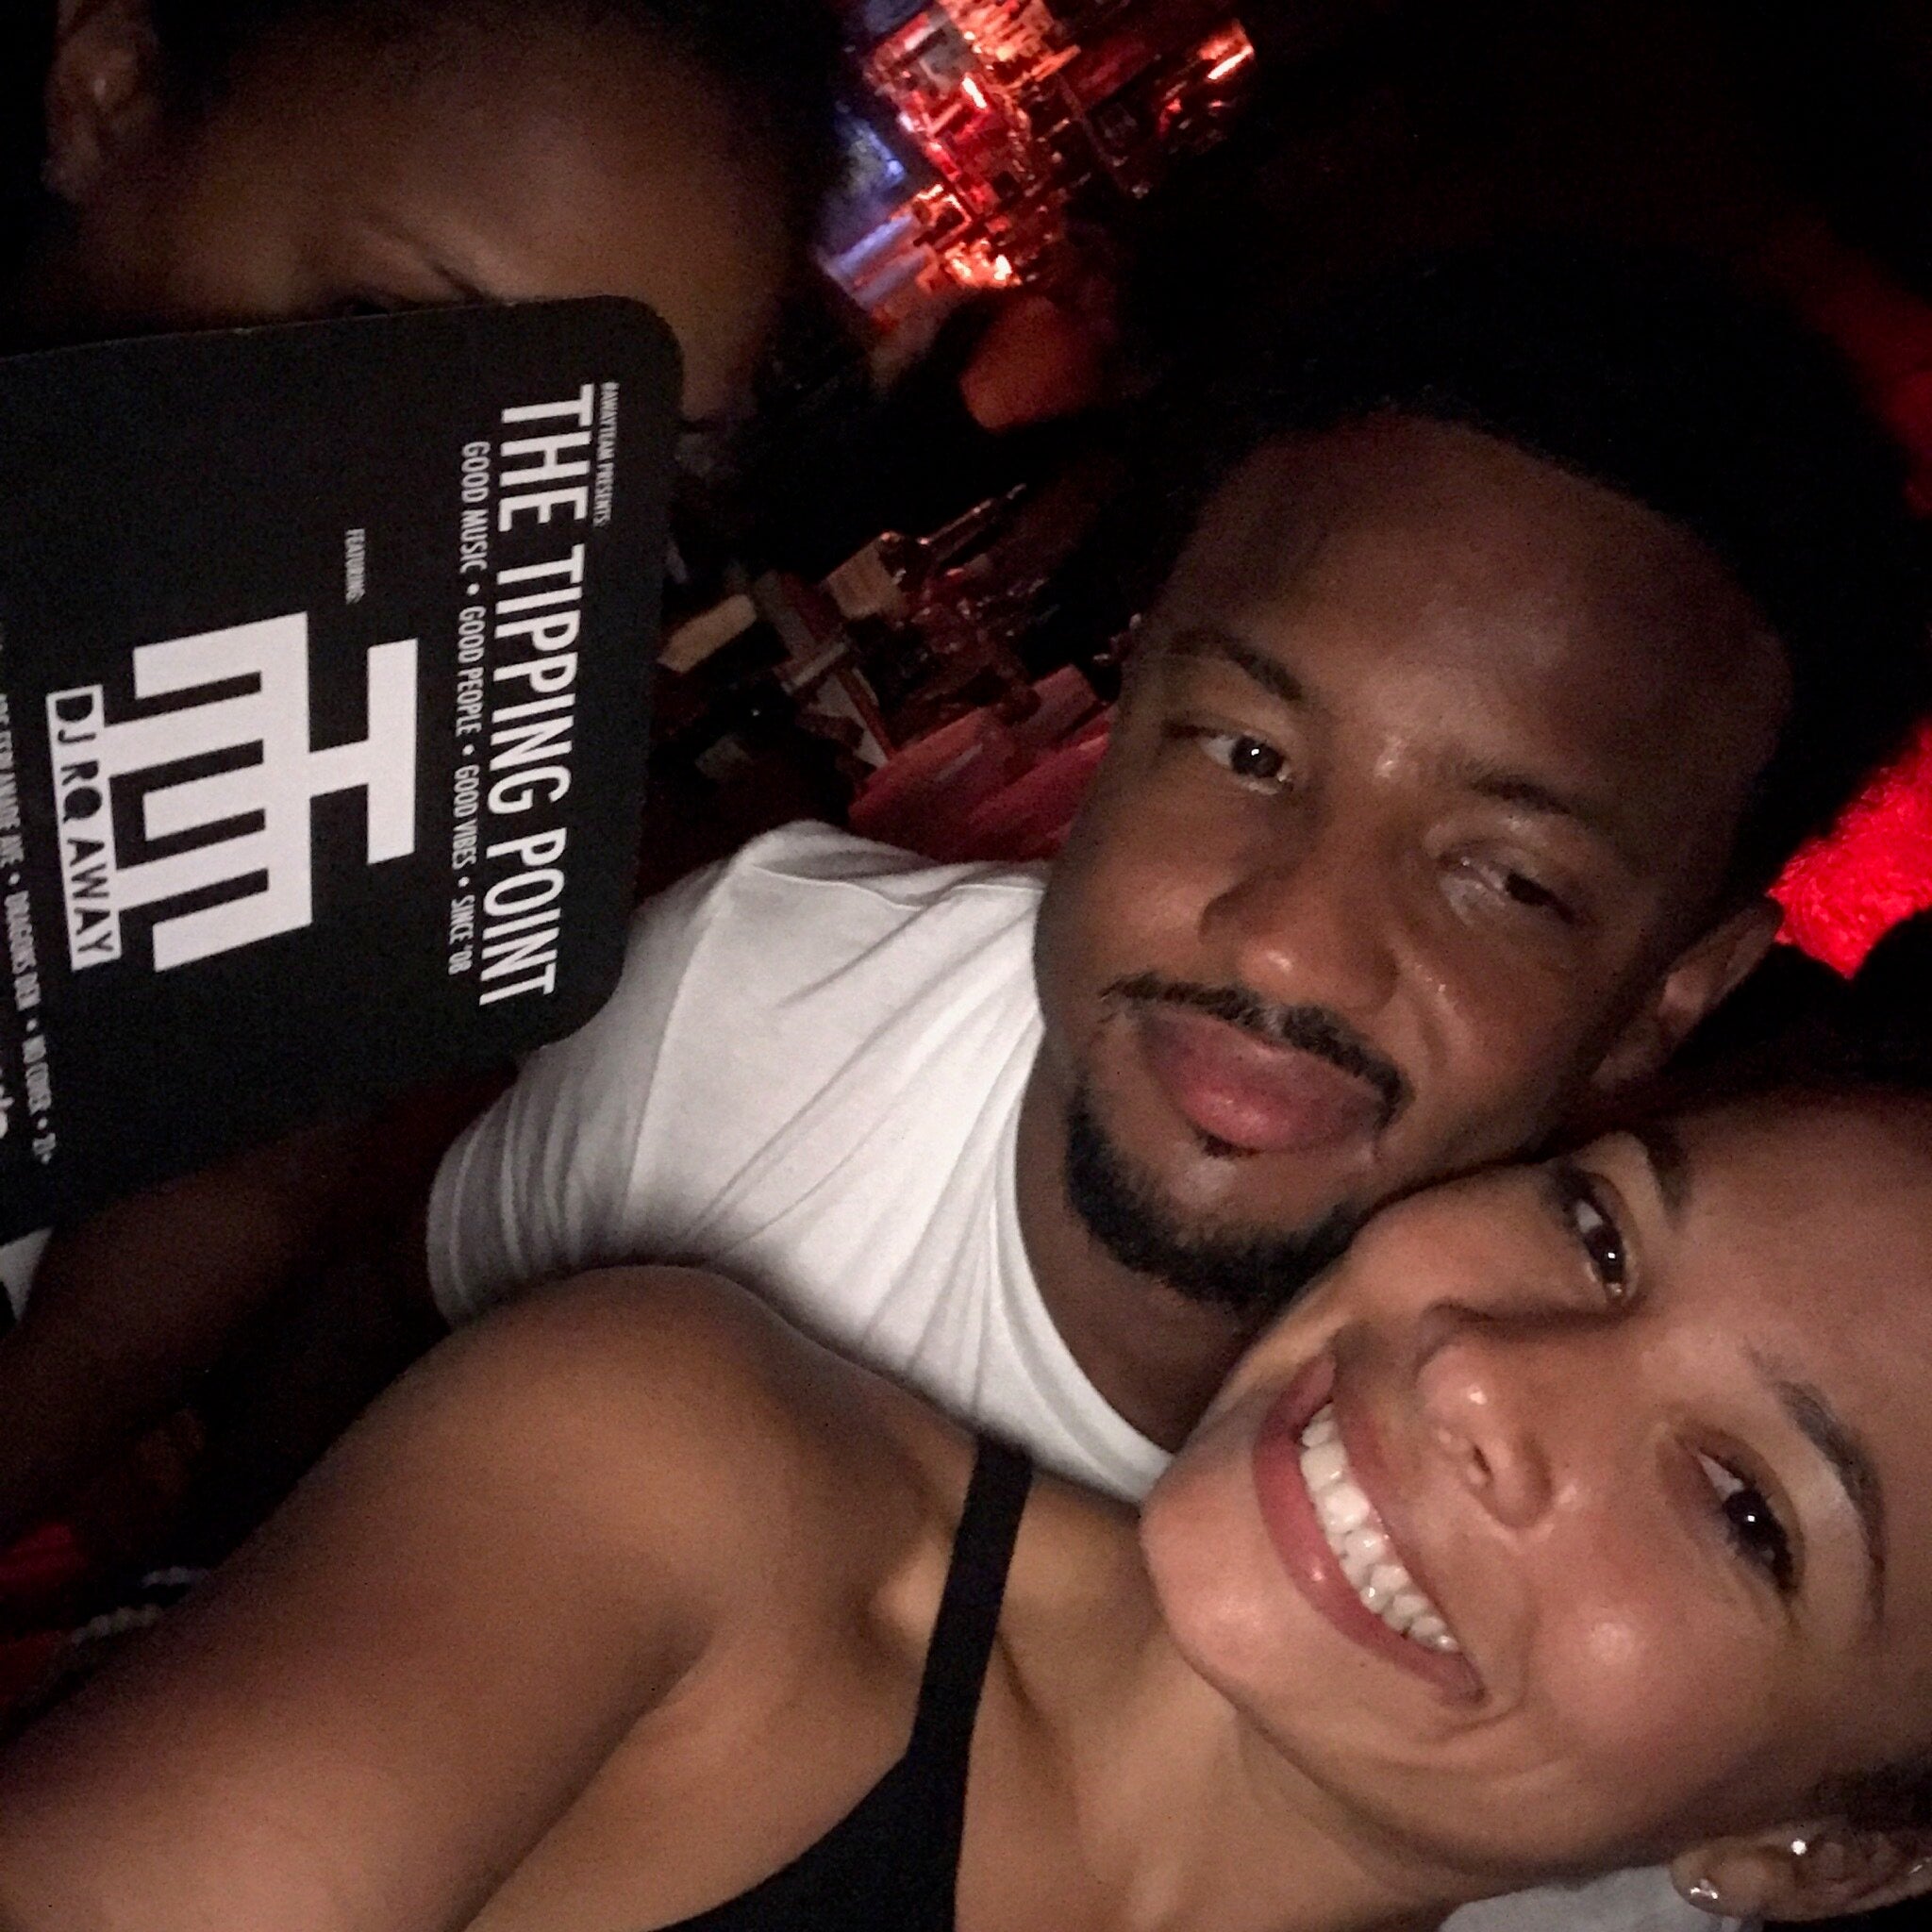 Kathleen And Christopher Found Their Happily Ever After At ESSENCE Fest